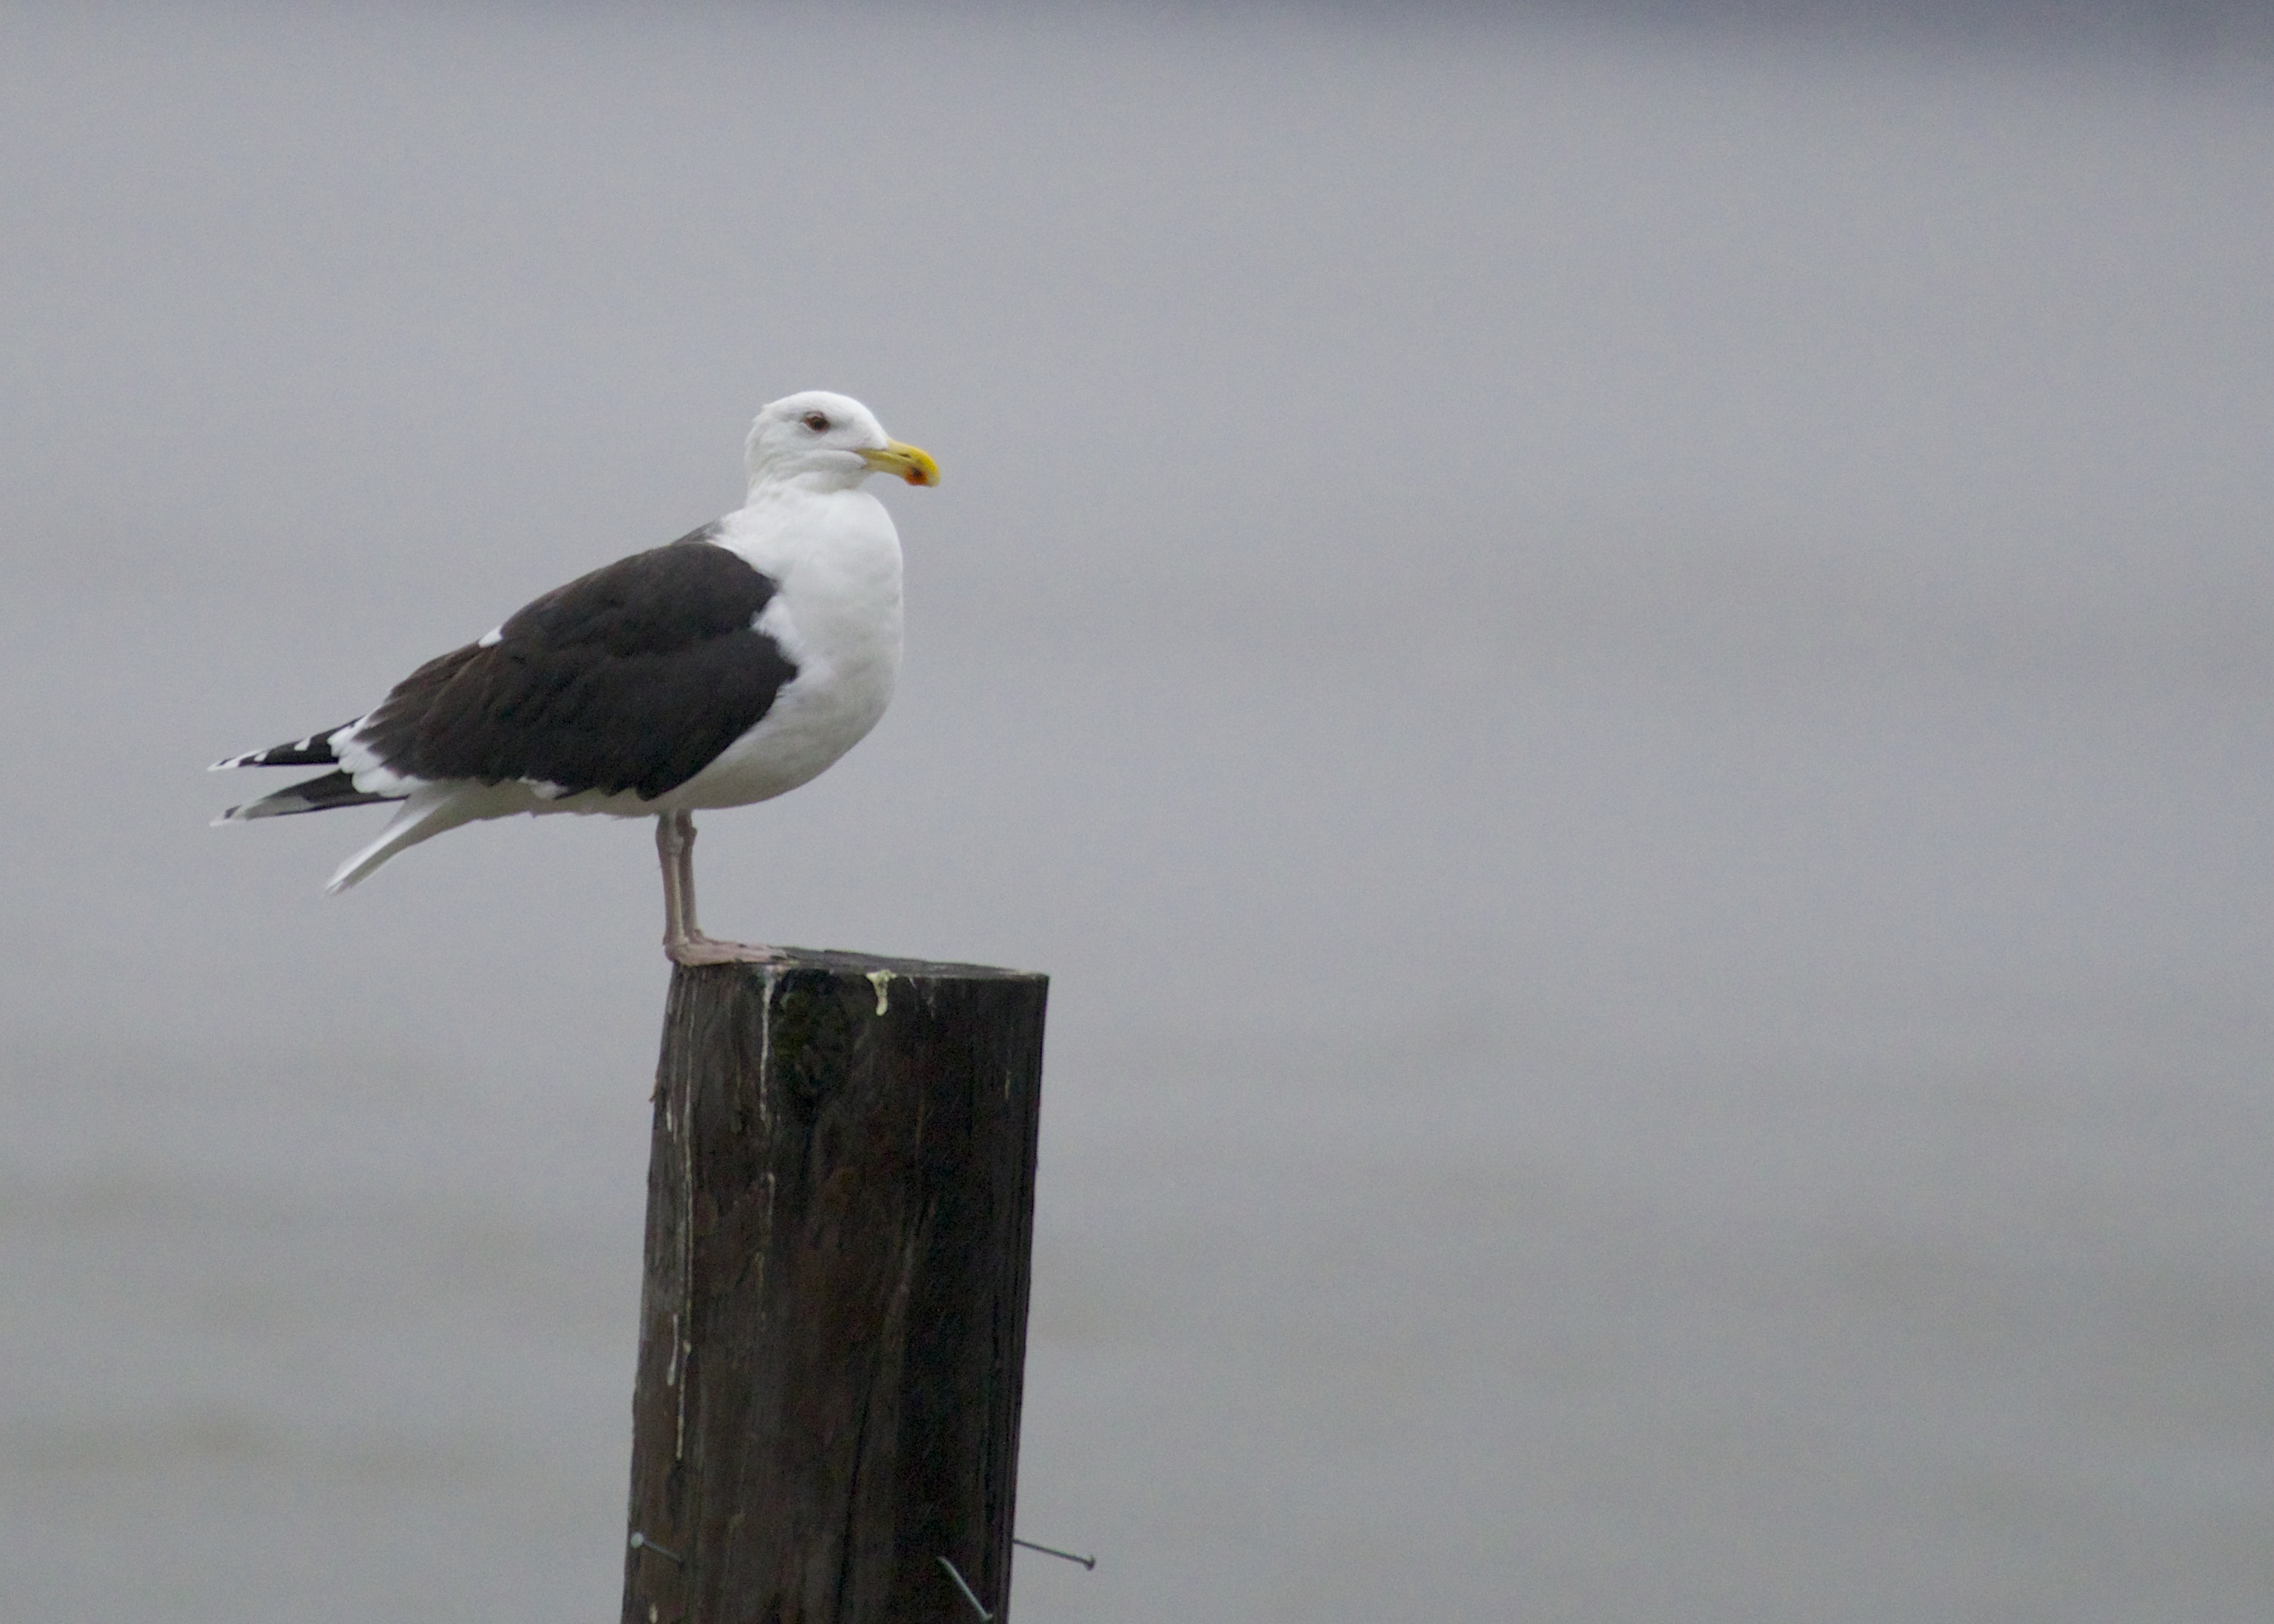 Greater Black-backed Gull at the Beacon Ferry parking lot in Newburgh, 12/22/13.